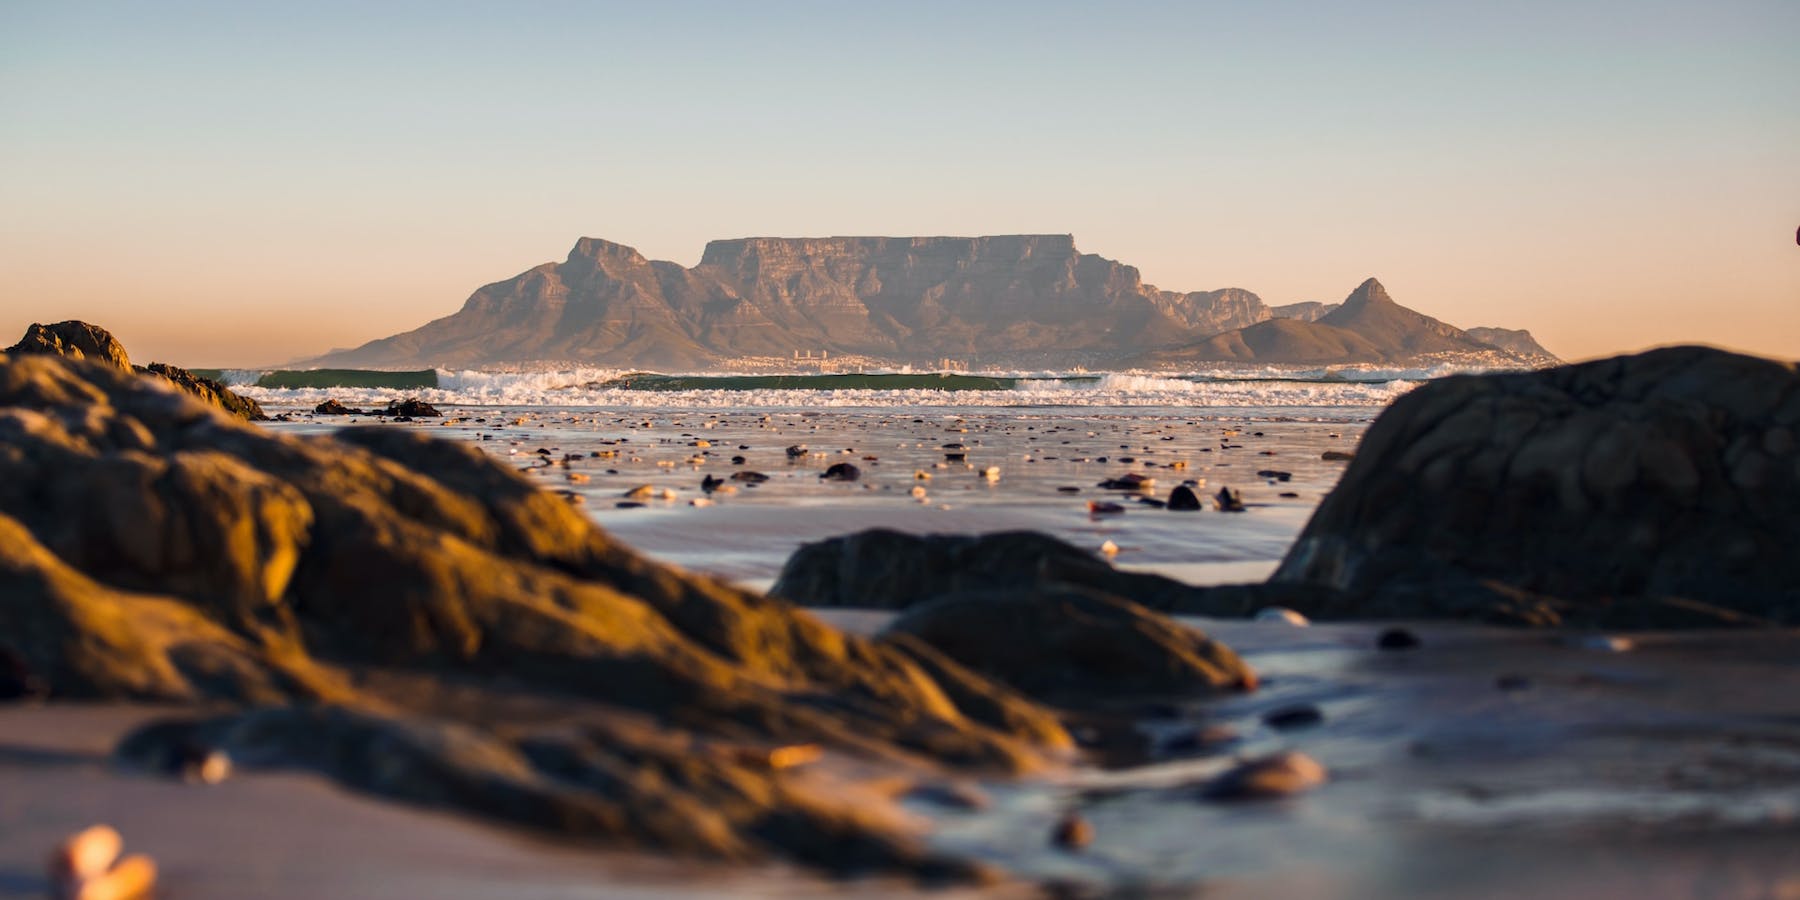 Table Mountain from the beach in Cape Town, South Africa